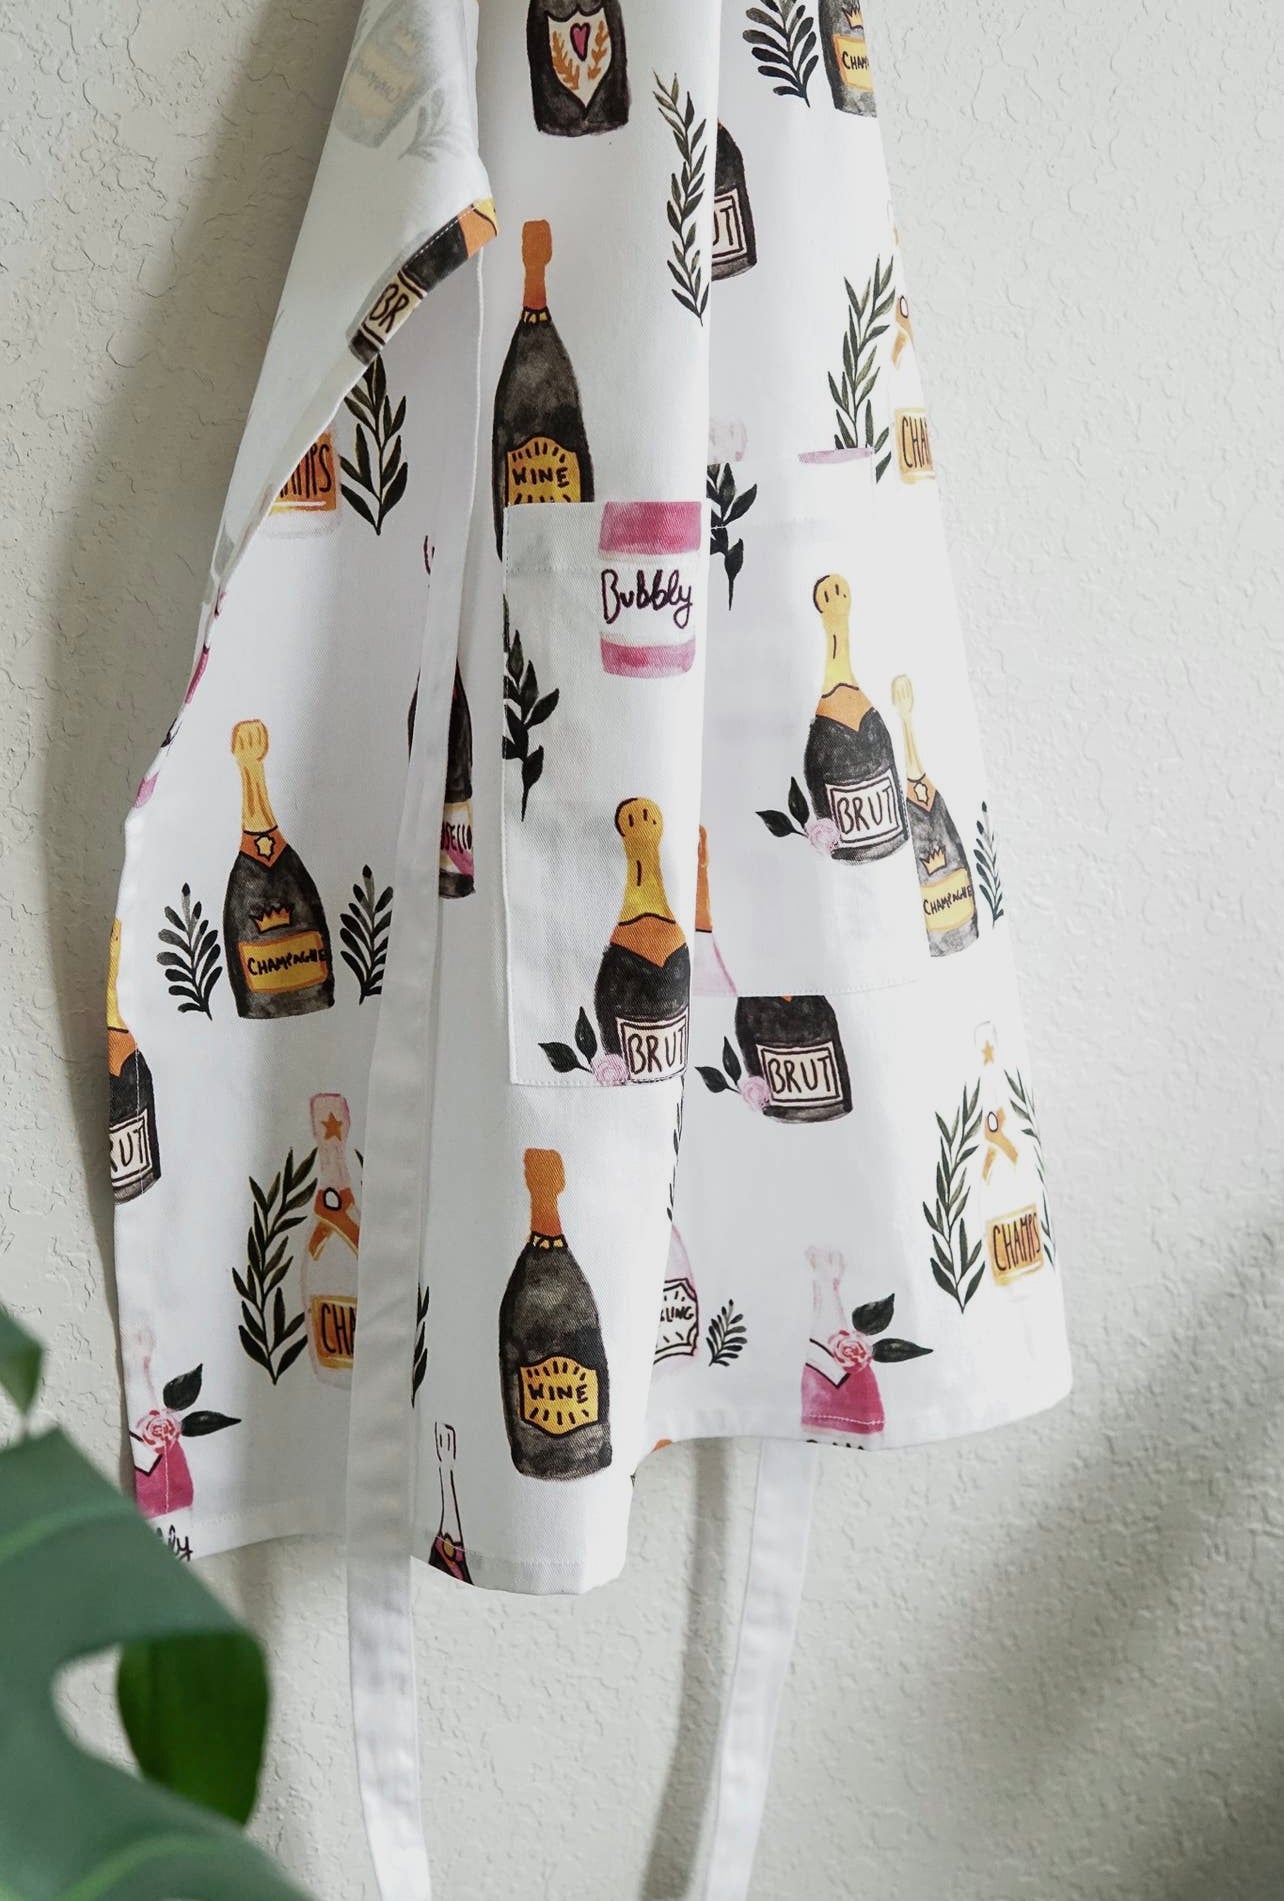 French “Bubbly” Apron